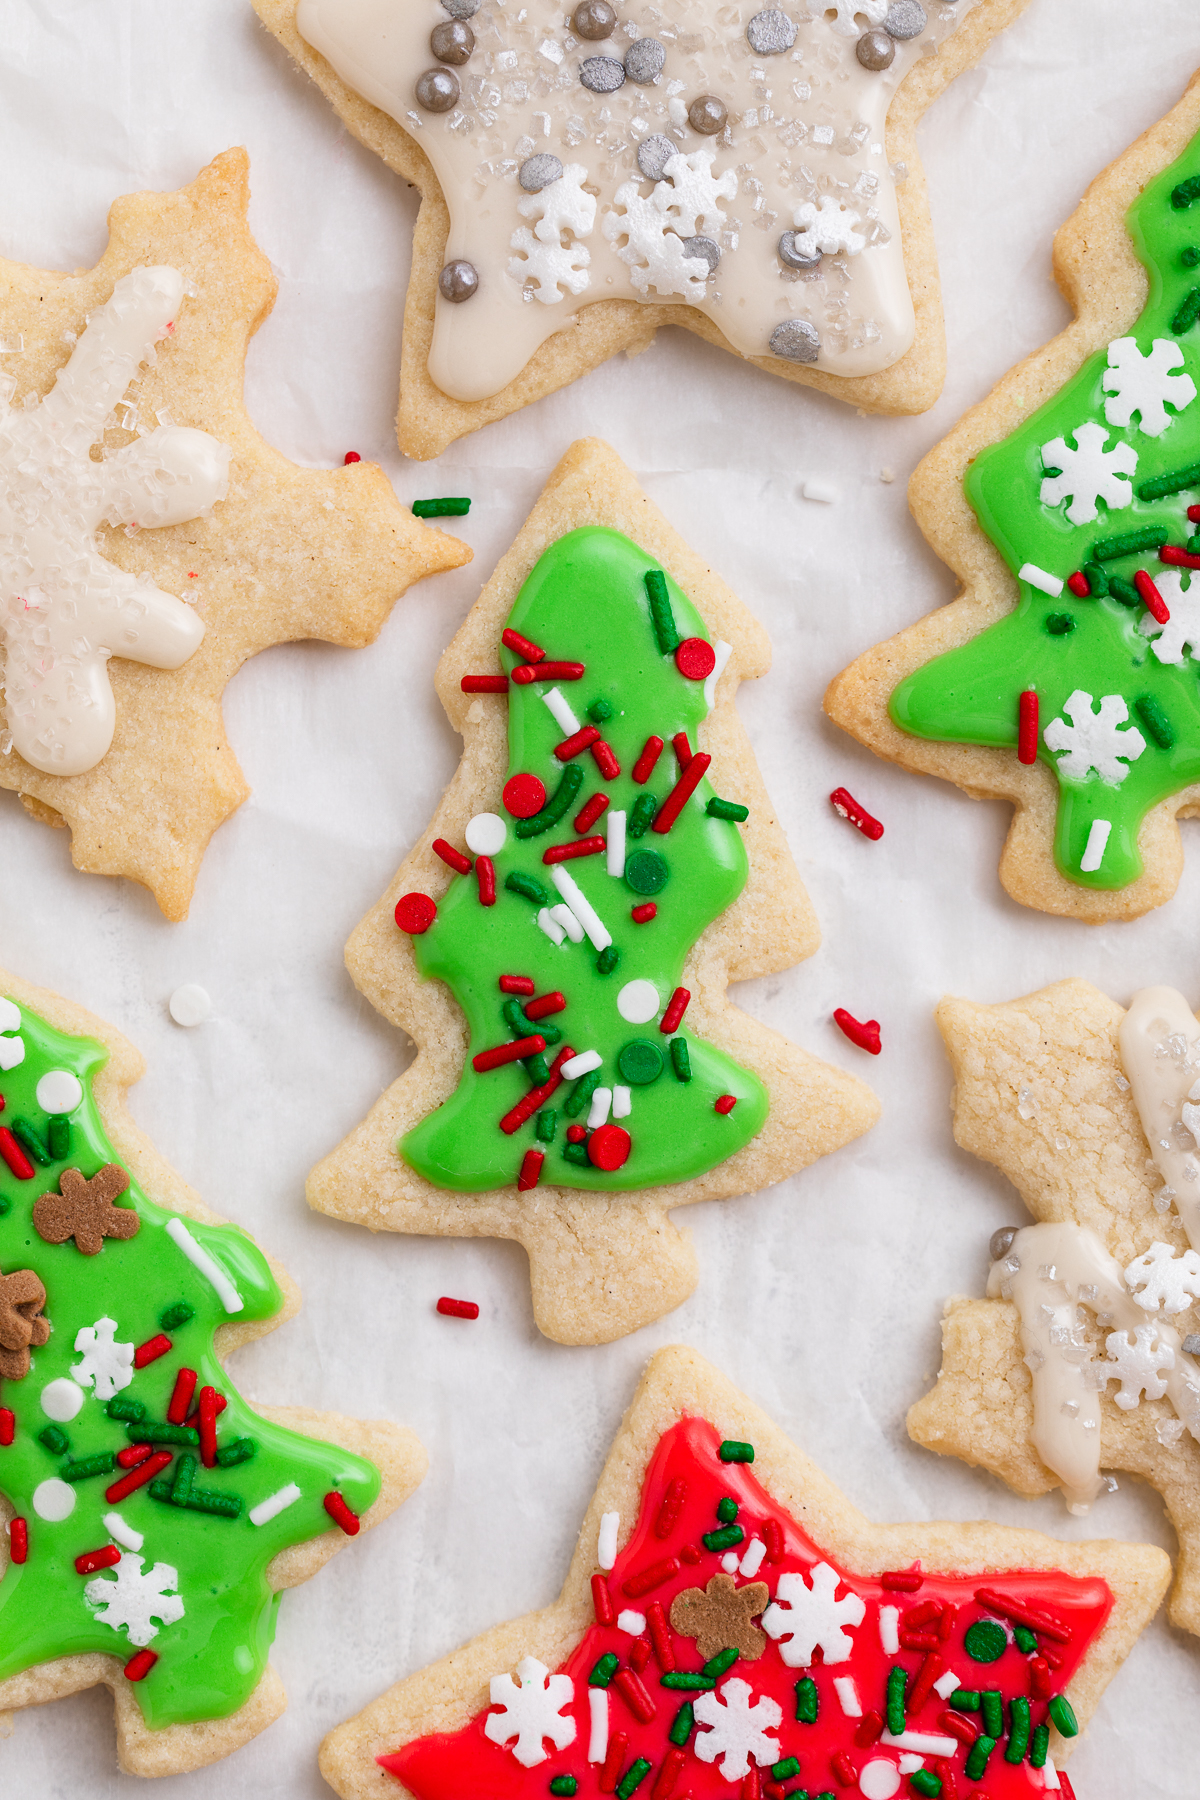 Overhead view of decorated gluten-free Christmas cookies, with a green tree-shaped cookie front and center.